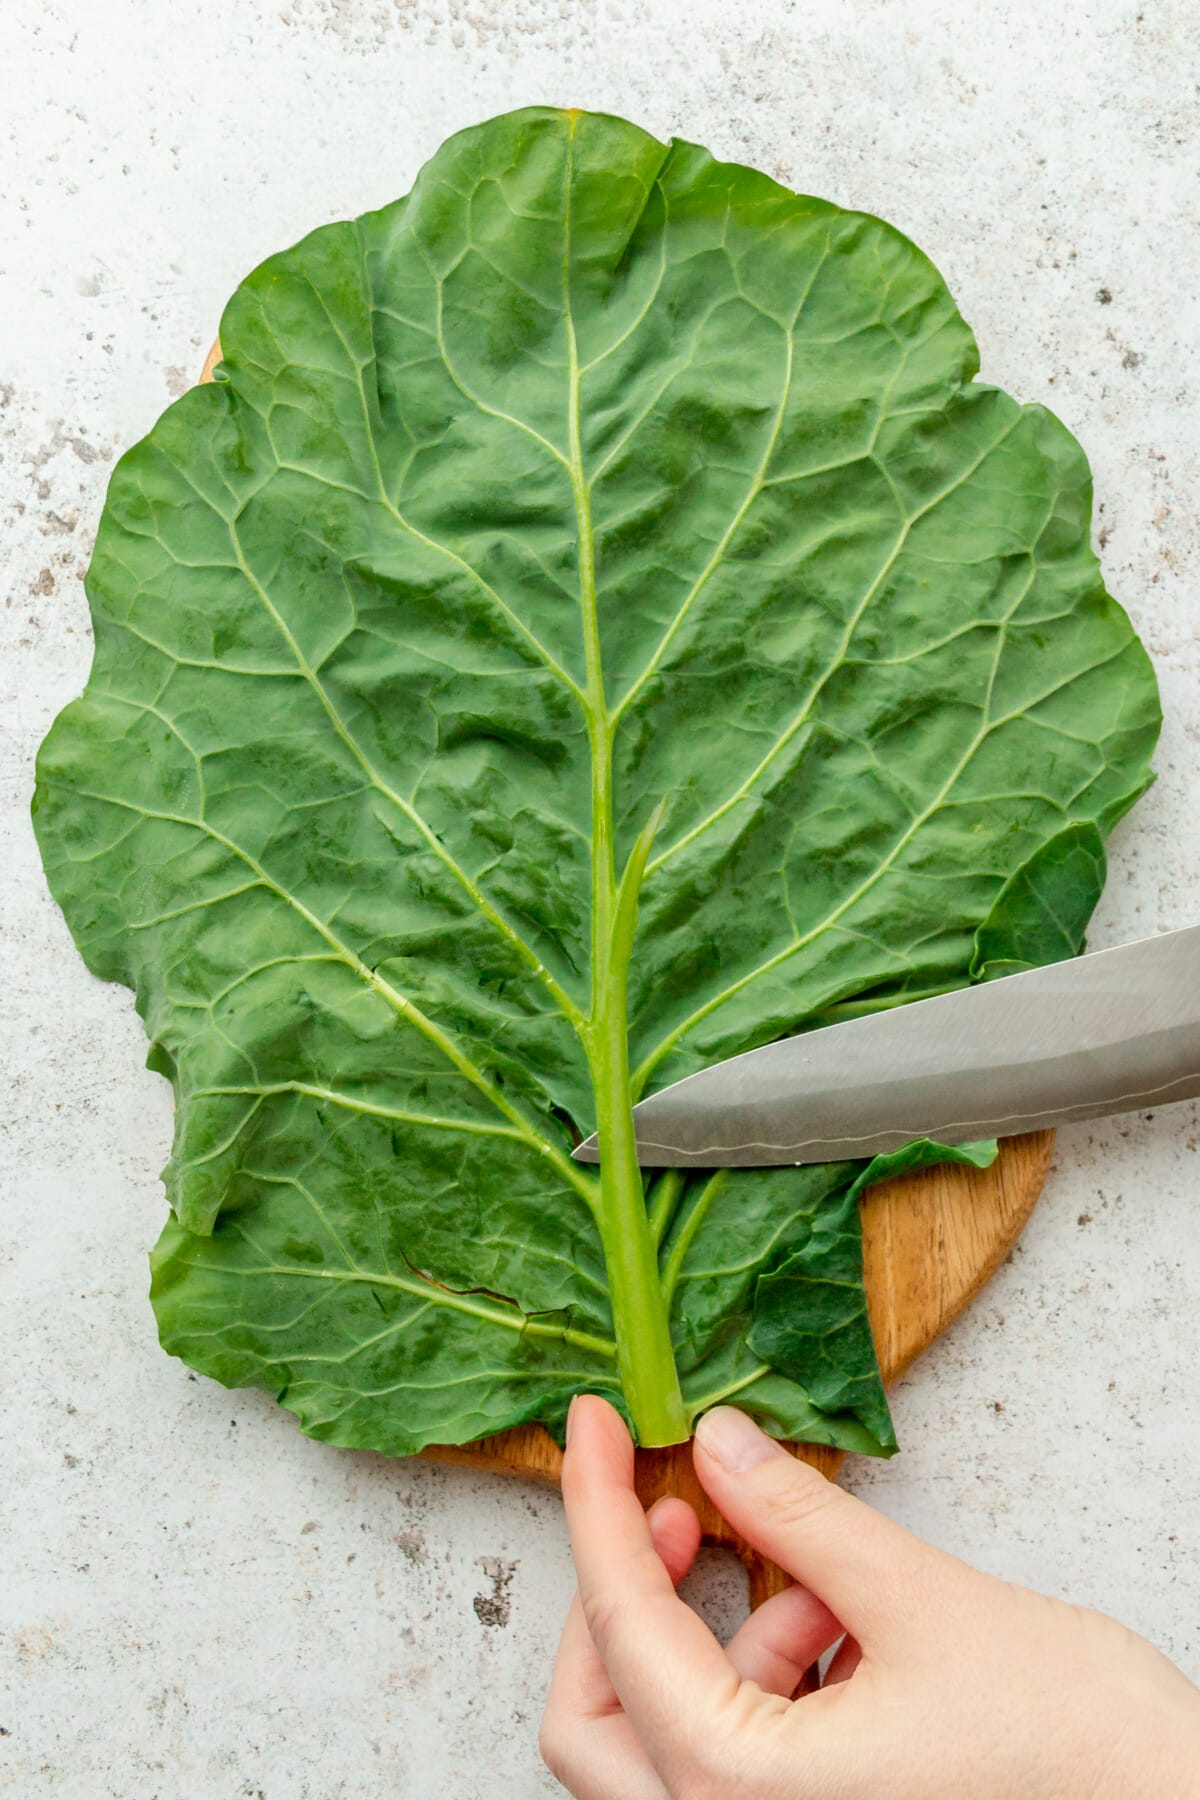 The thickest part of a collard green leaf is shaved on a light grey surface.